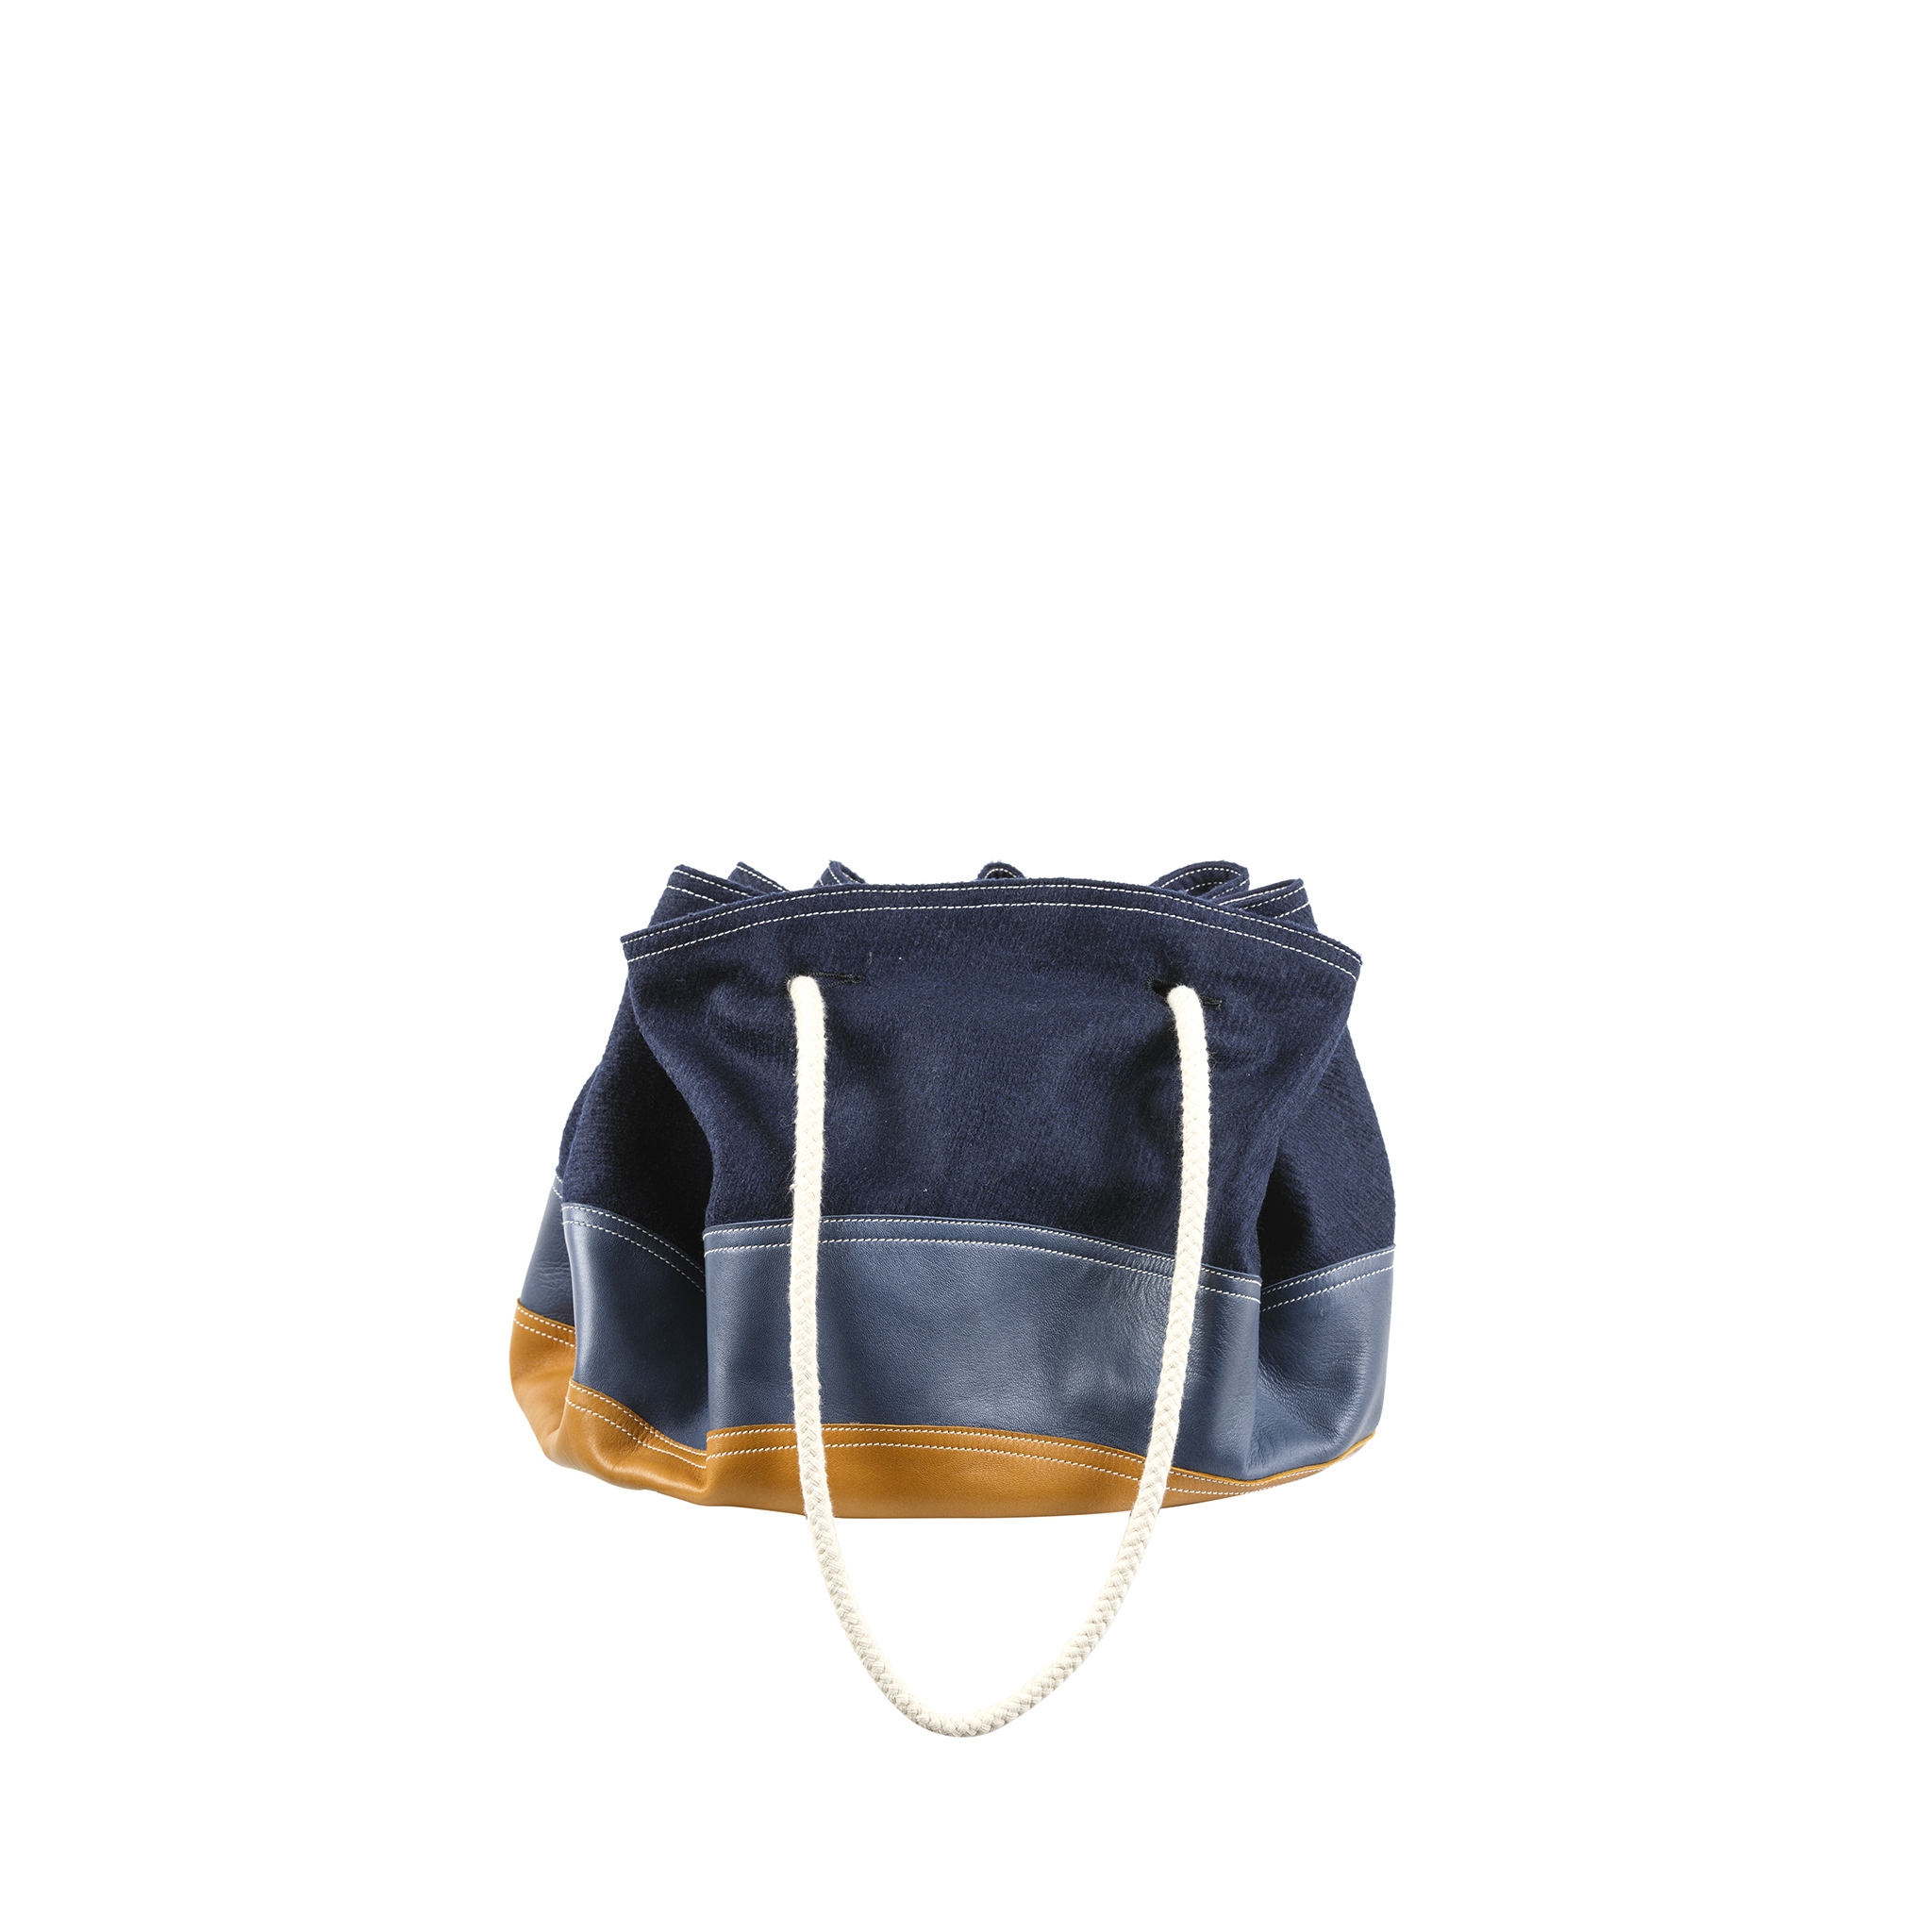 Cruising Bag - Merino wool and glossy leather - Blue and tan colors